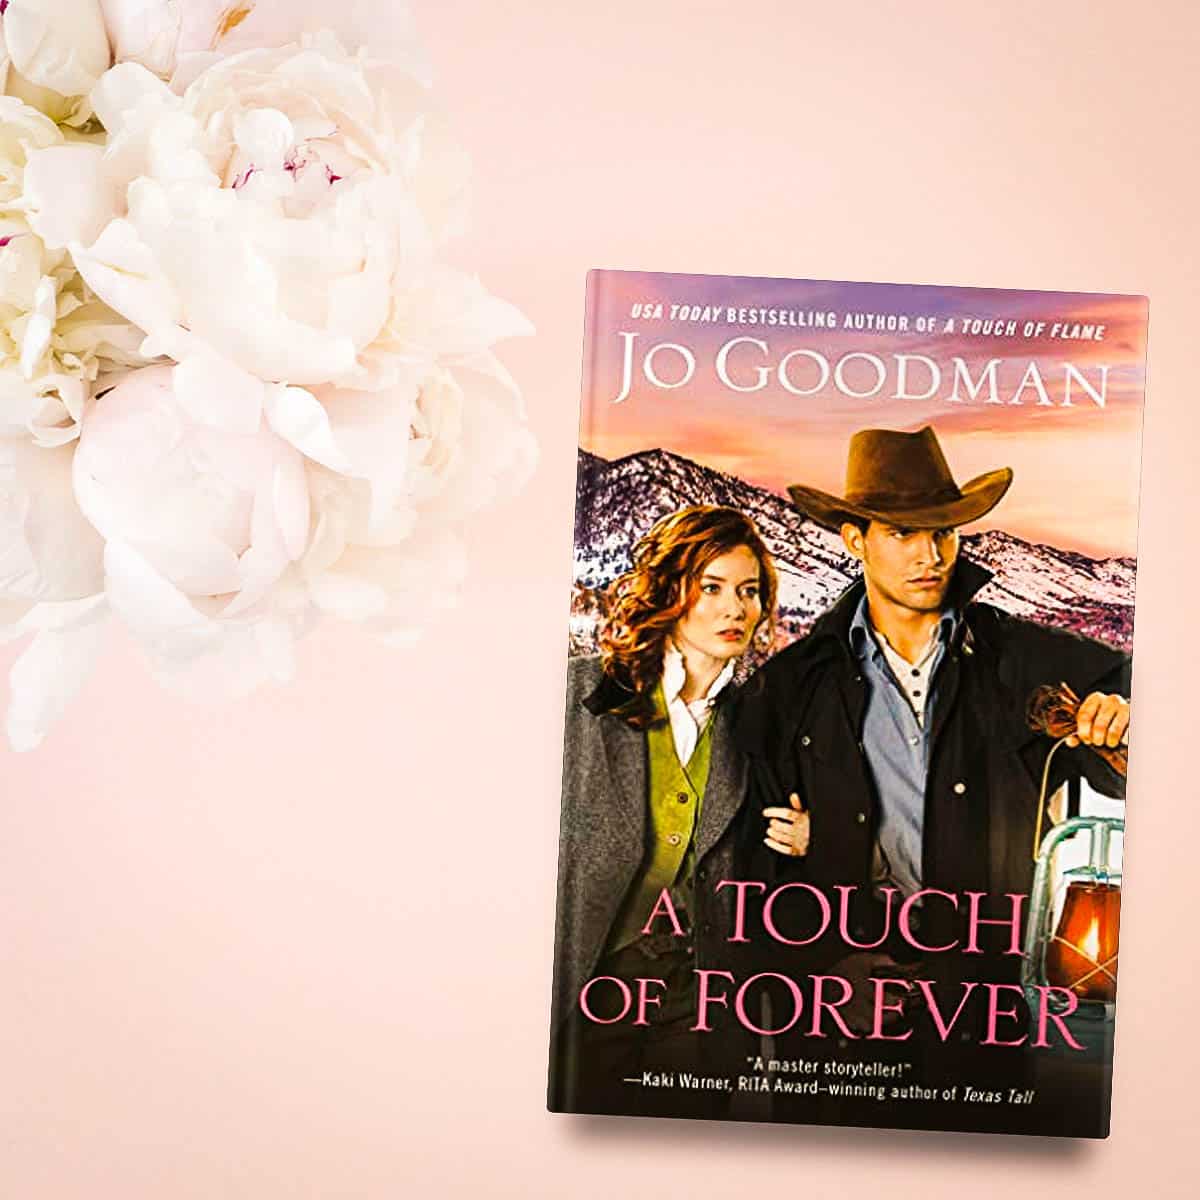 Read my review and an exclusive excerpt from A Touch of Forever by Jo Goodman, the third book in the Cowboys of Colorado series, a slow-burning, small-town, marriage-of-convenience historical romance.